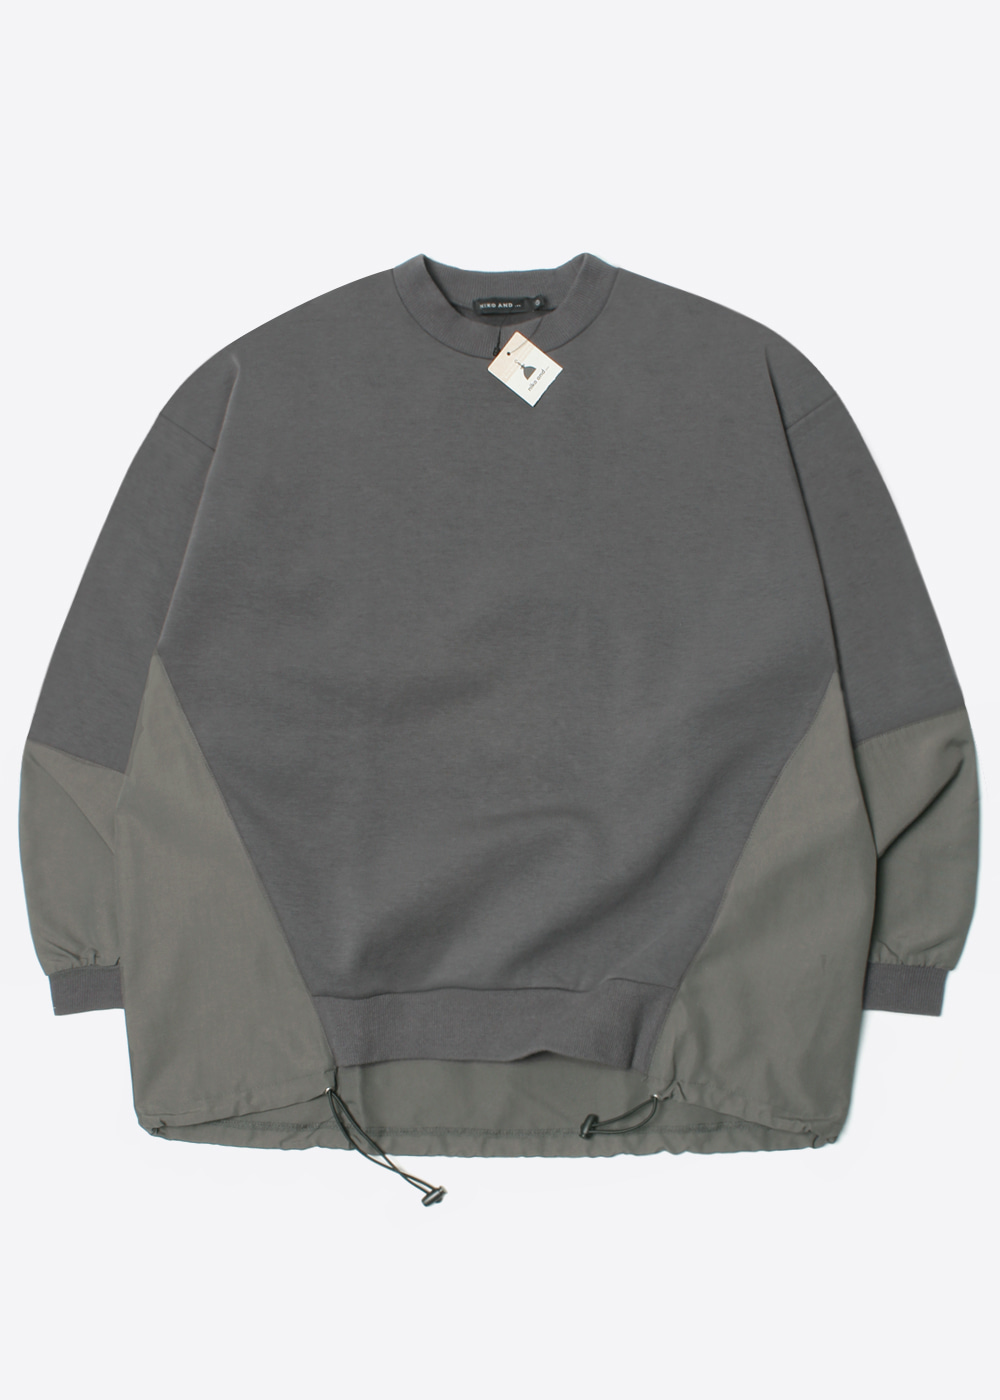 NIKO AND’over fit’ two-ton sweatshirt